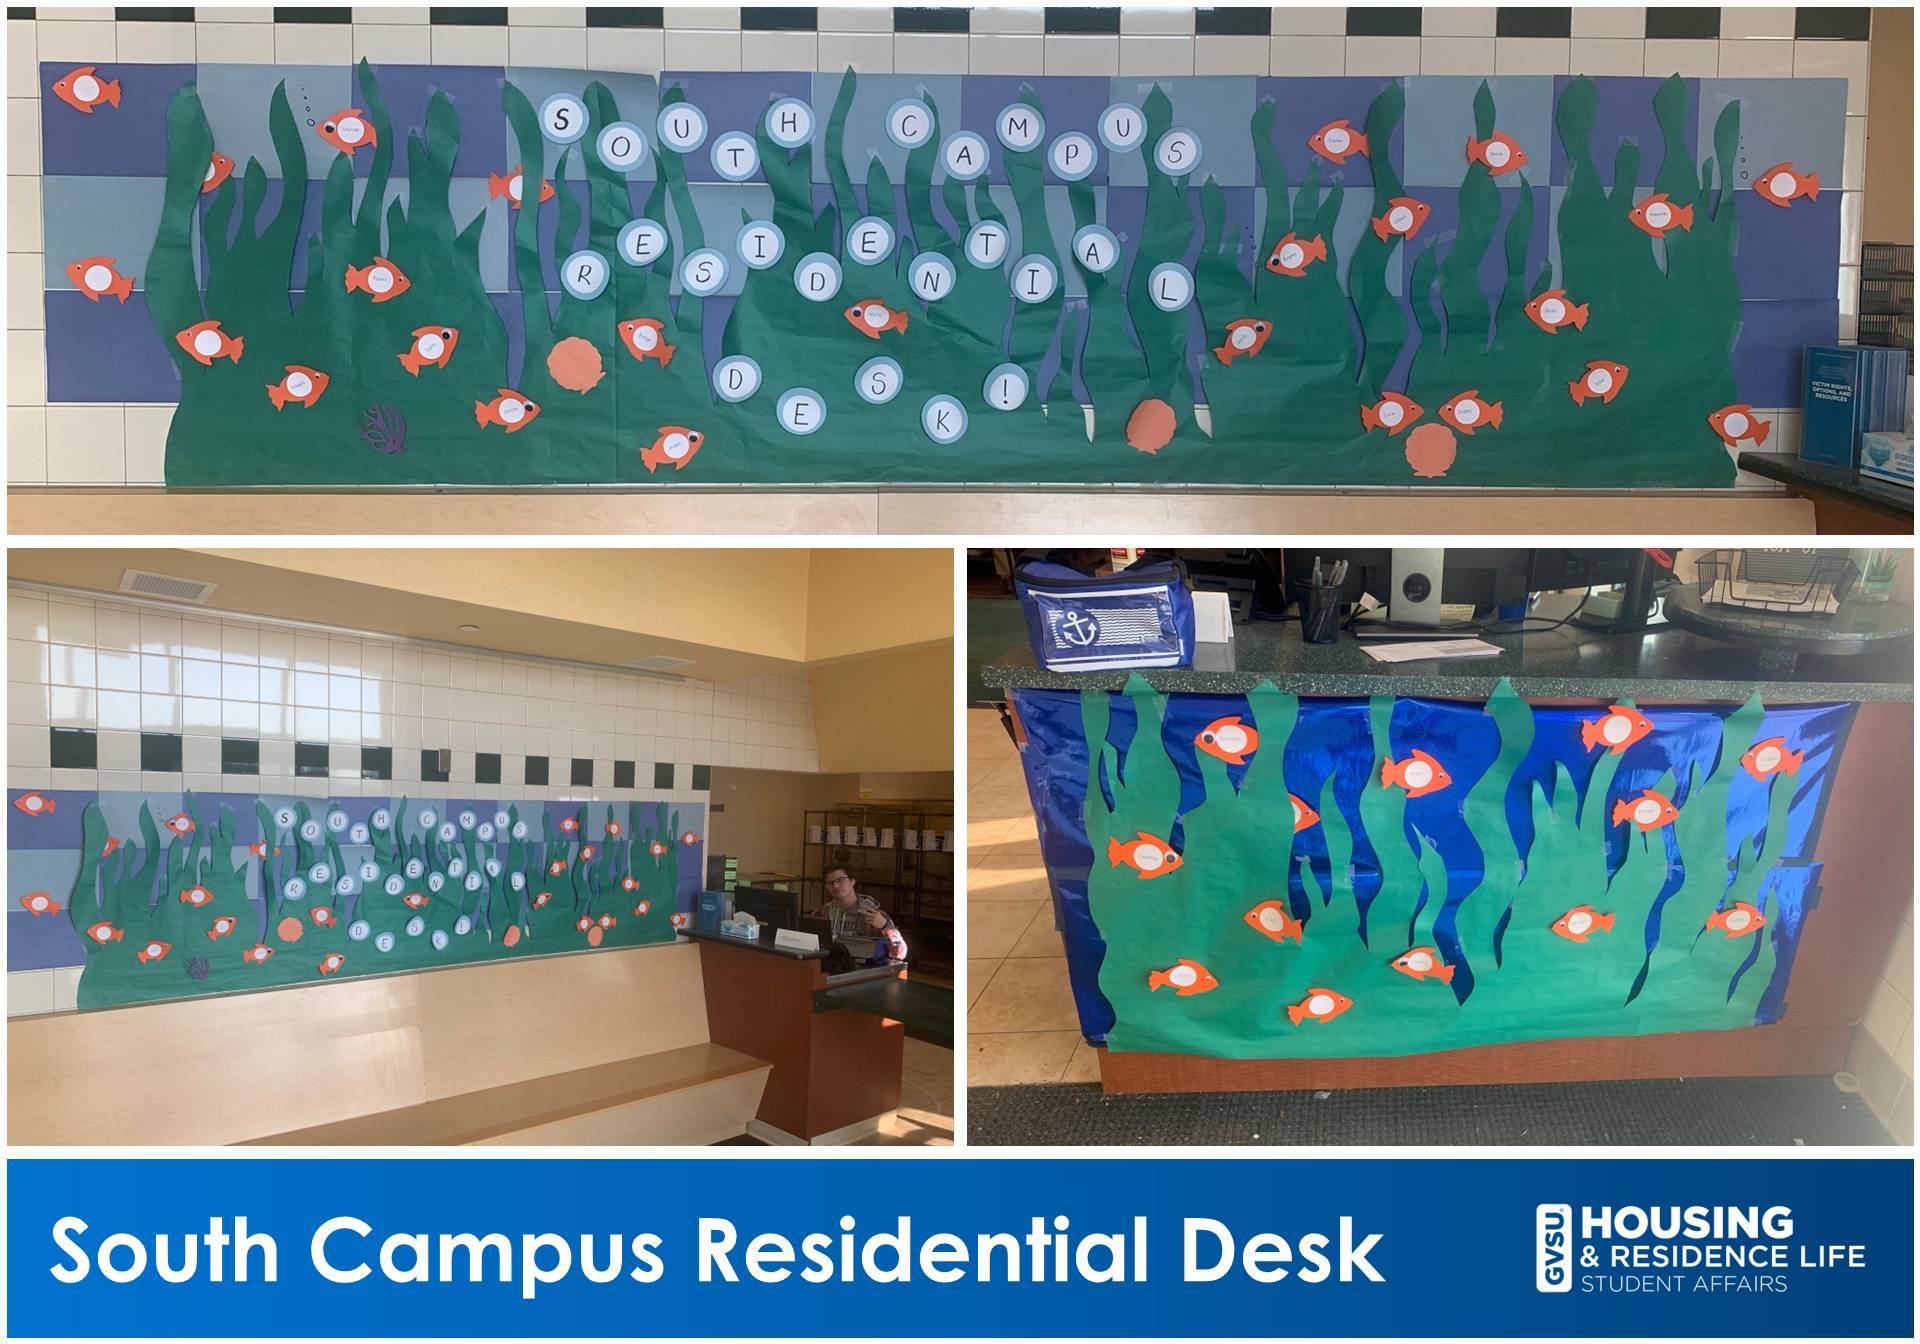 South Campus Residential Desk